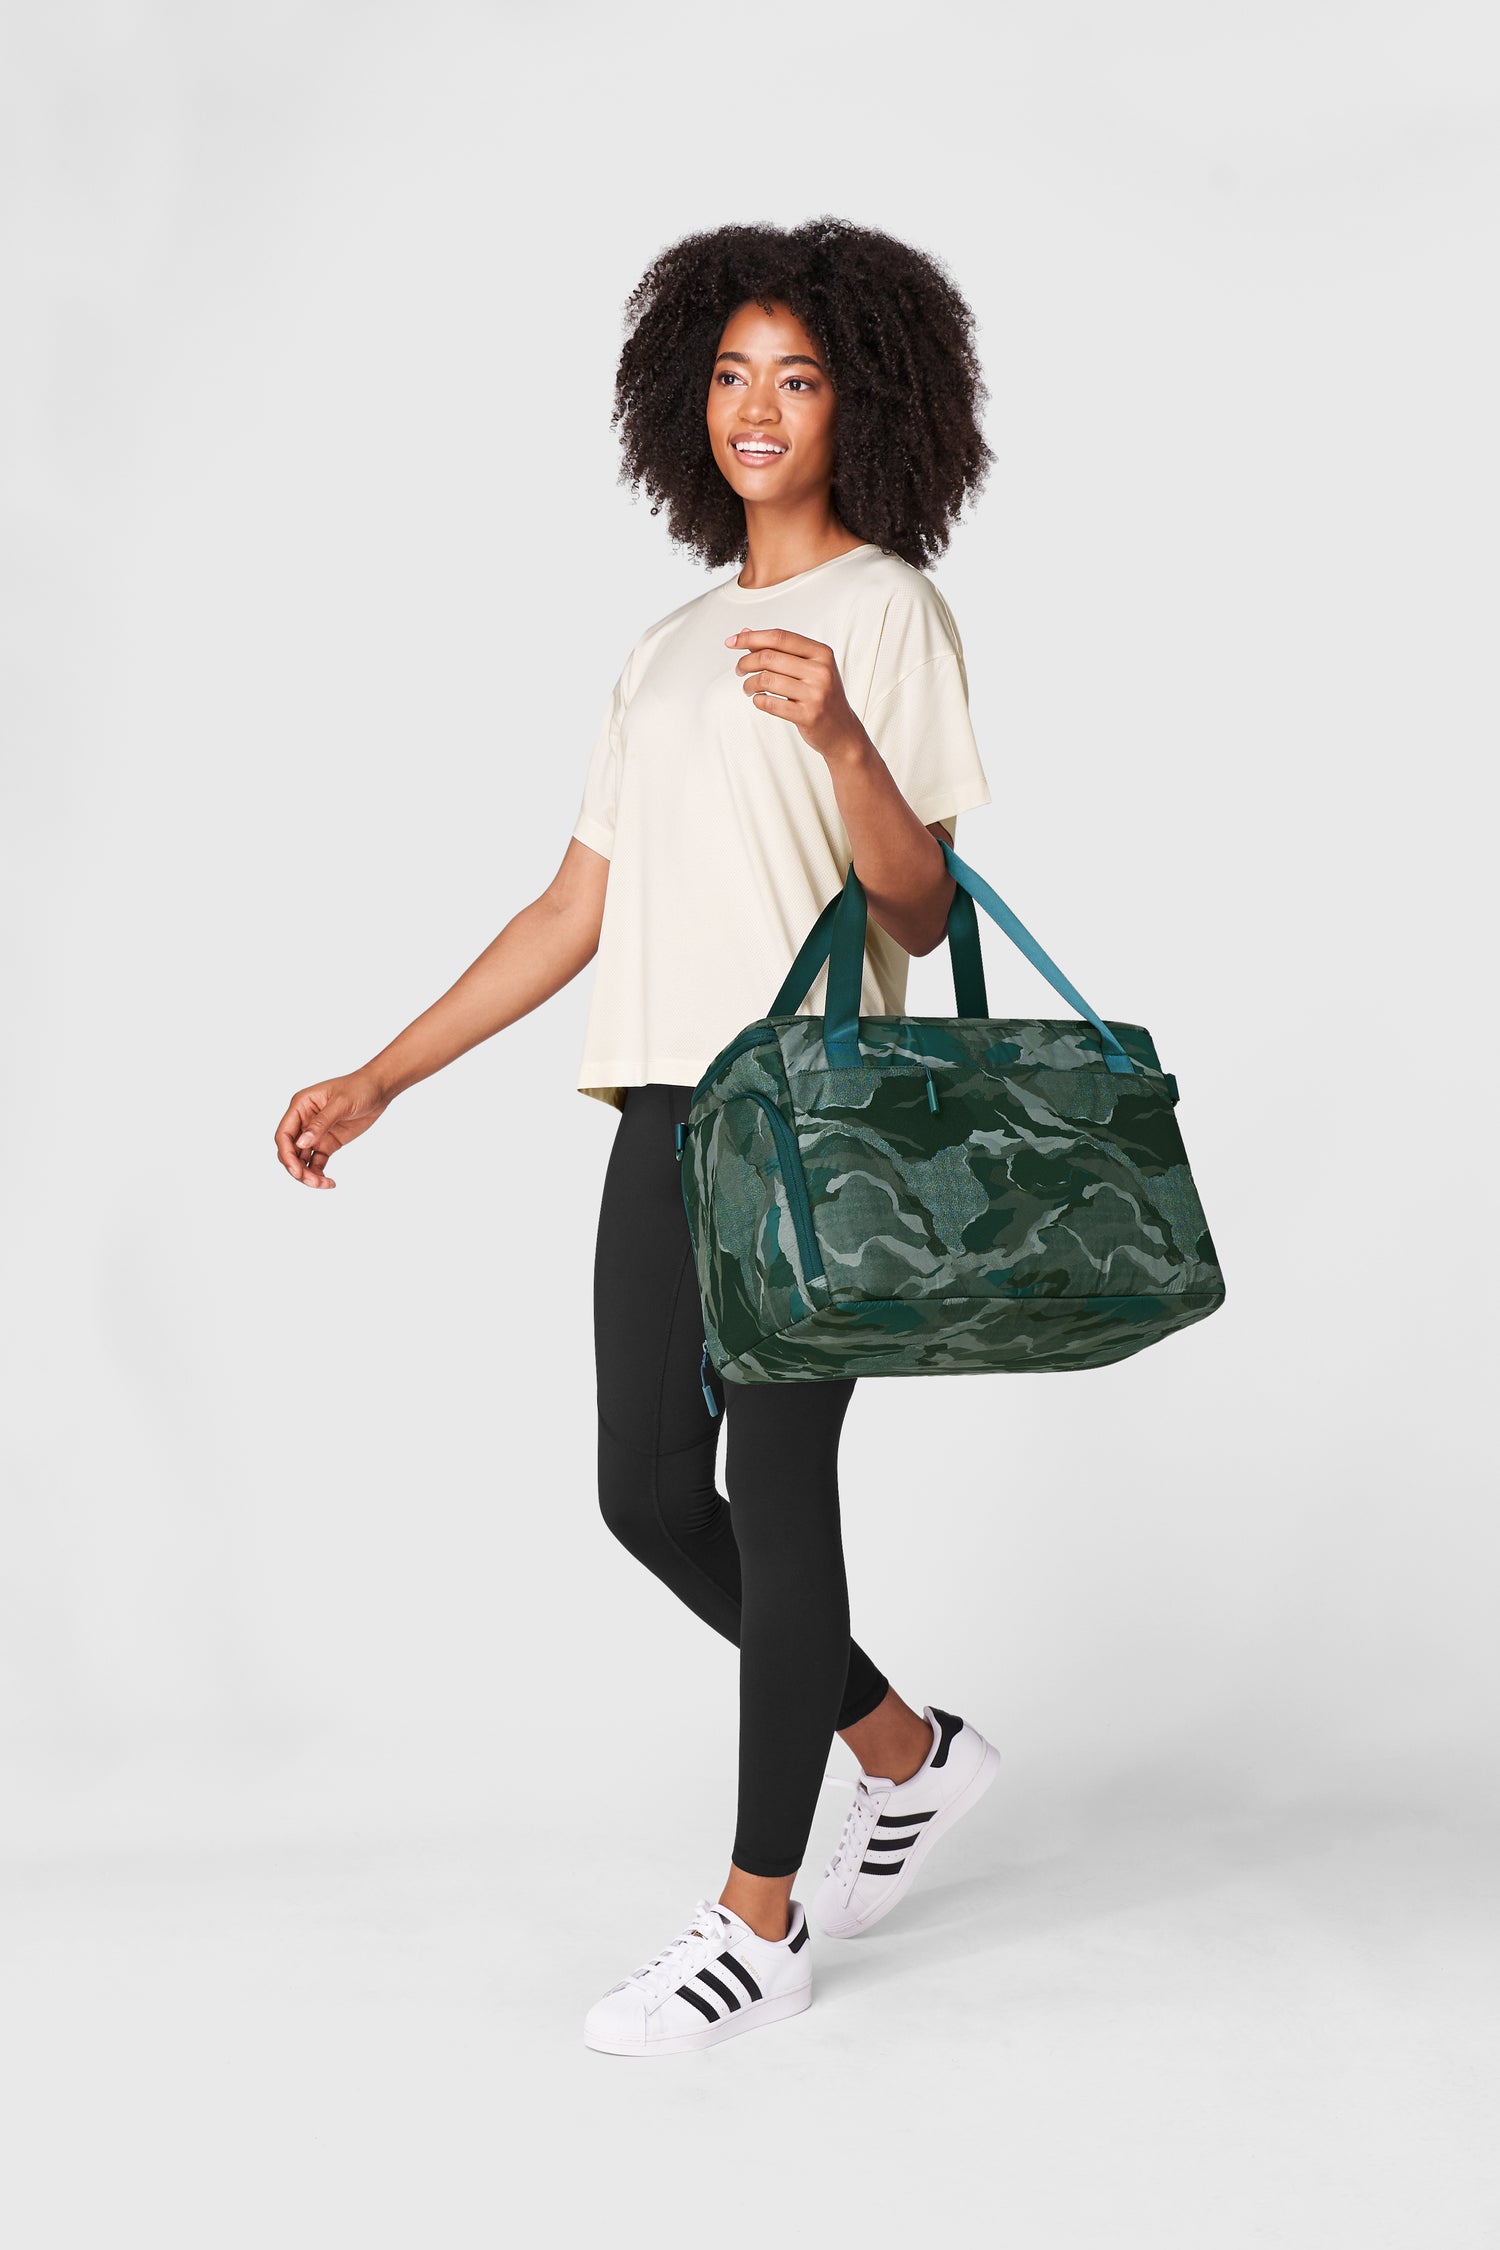 FWD On The Go 24L Duffel Bag - ACCESSORIES BAGS & BACKPACKS